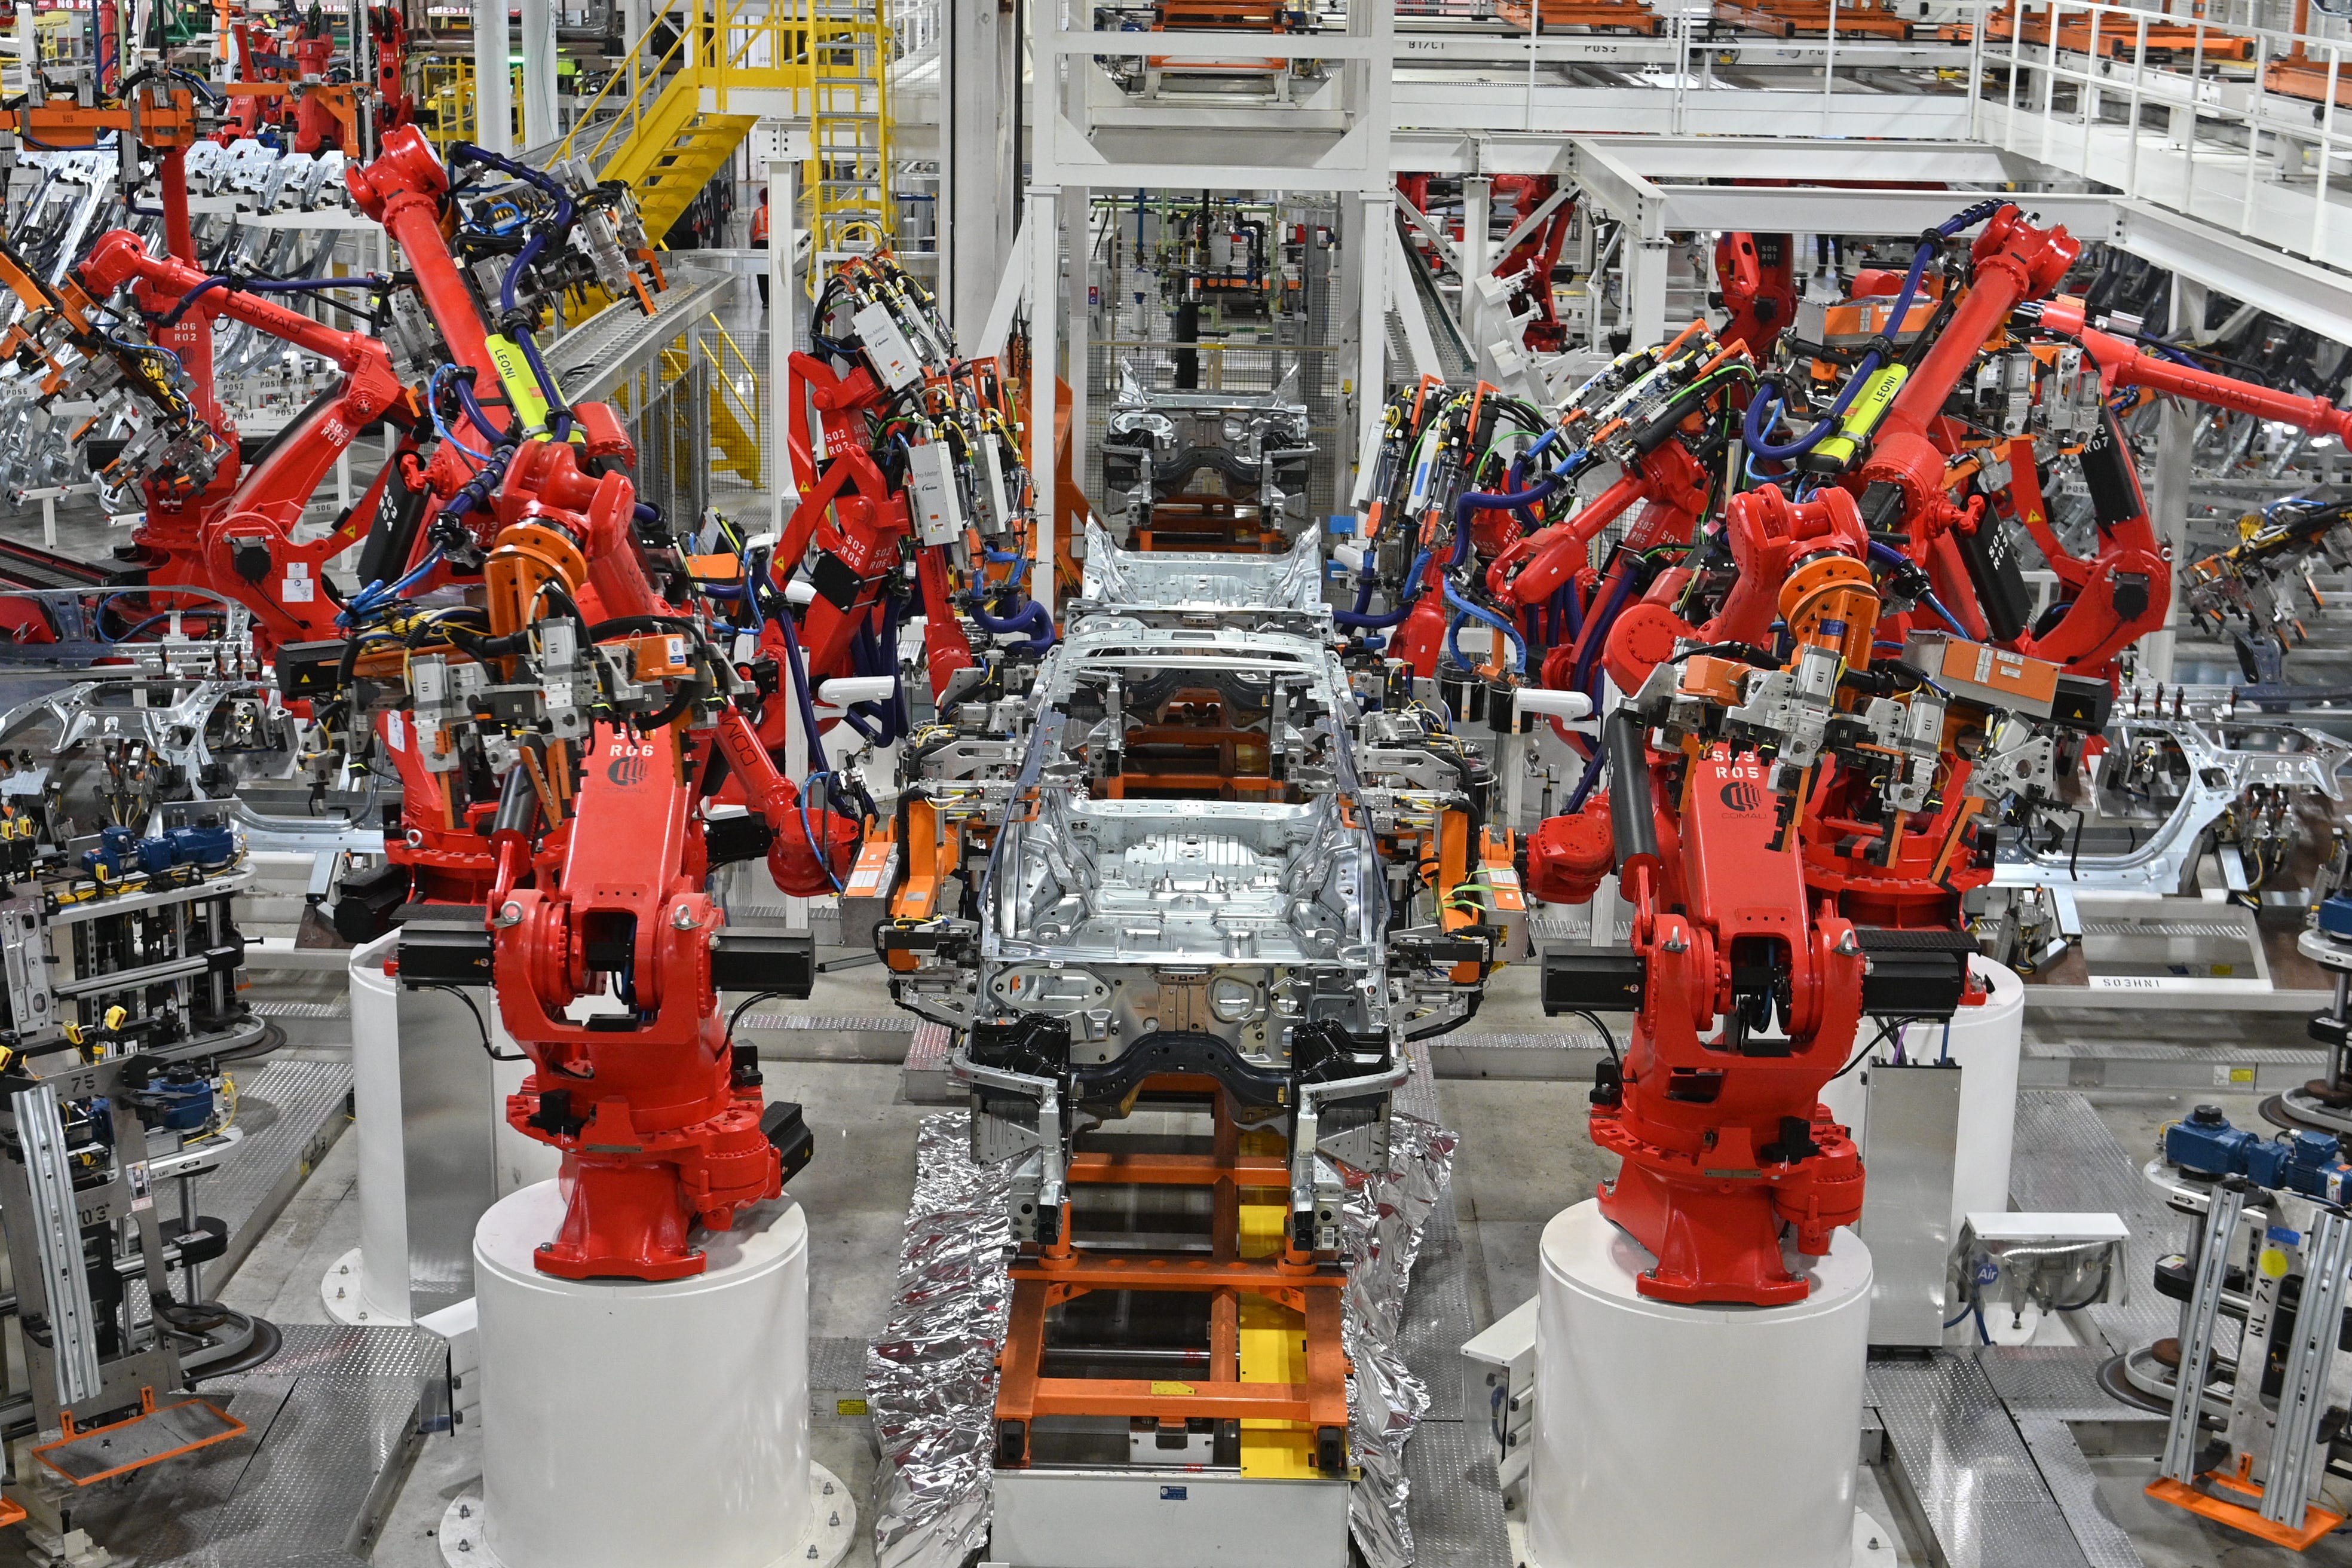 A 2021 Jeep Grand Cherokee L body goes through the Near-line Laser Radar, as robots measure hundreds of preprogrammed surface and alignment points, at the Stellantis Mack Assembly Complex in Detroit, June 10, 2021.